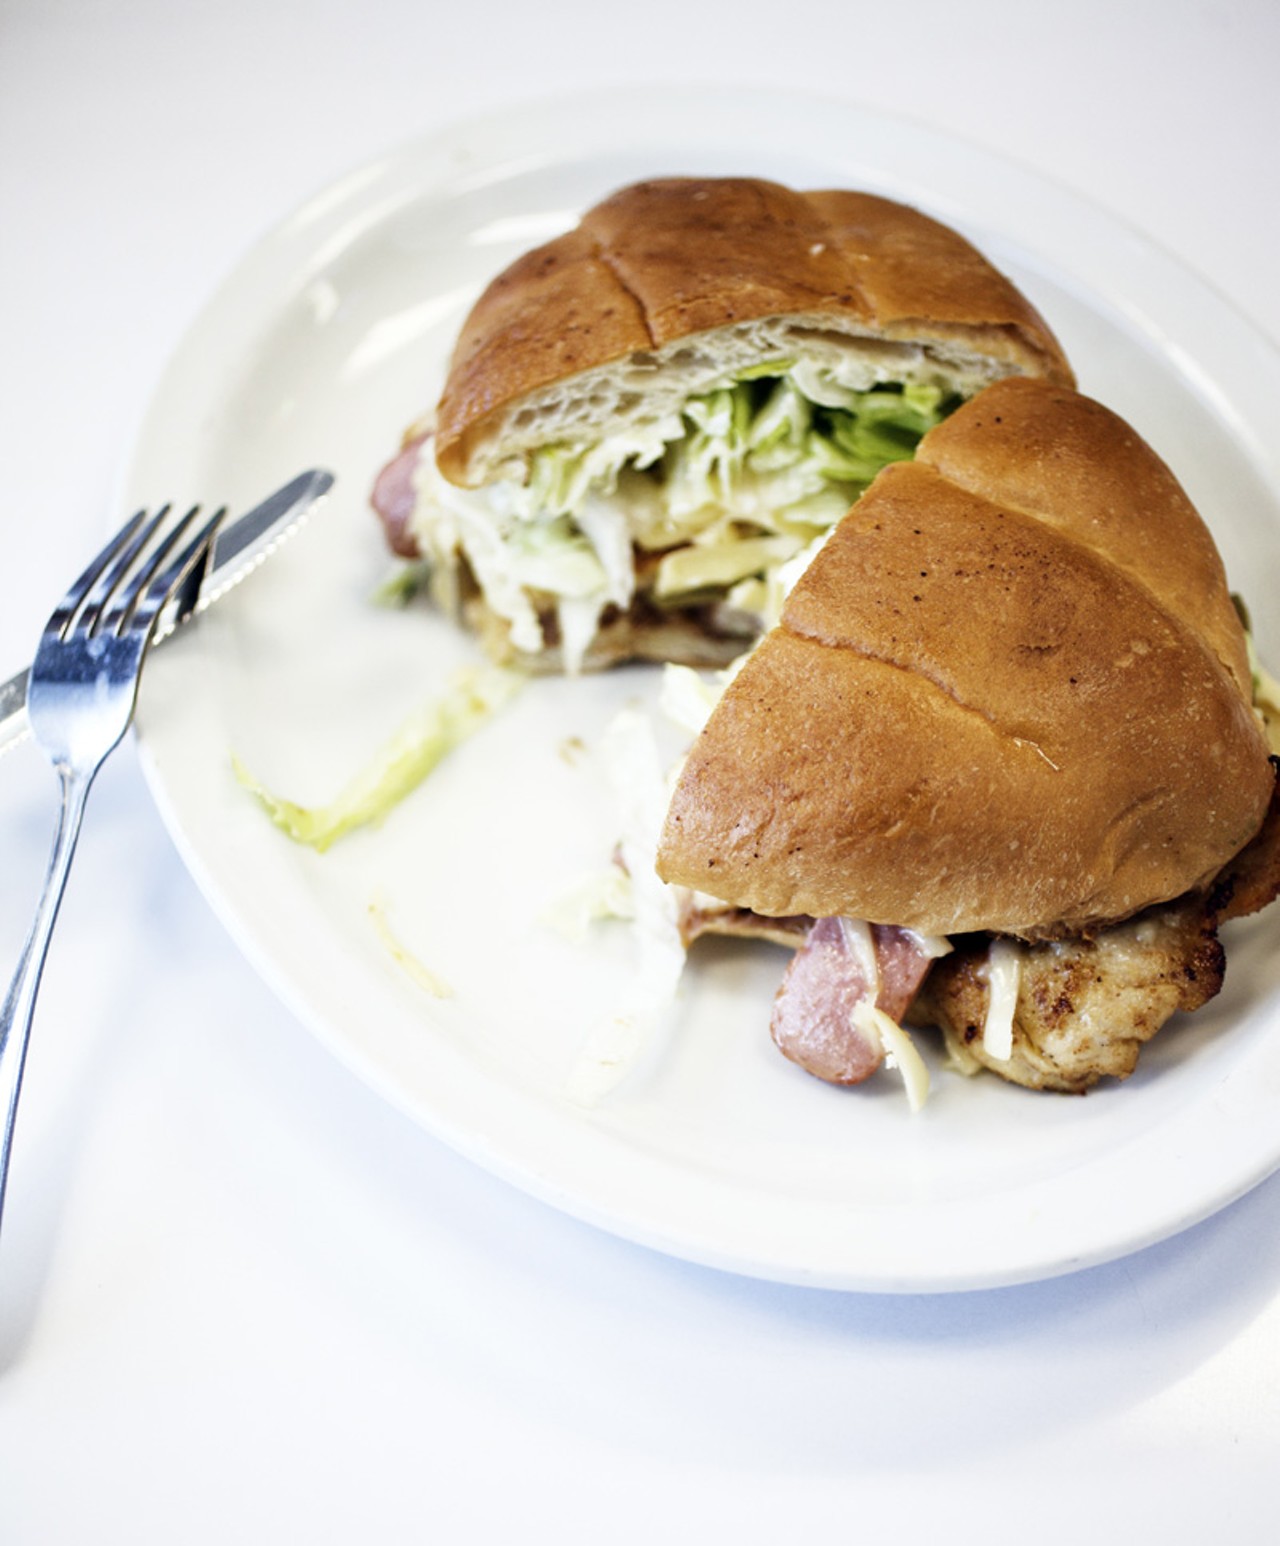 The Torta Tejana is a chicken, sausage, cheese, lettuce, tomato, beans, avocado and jalapeno sandwich.